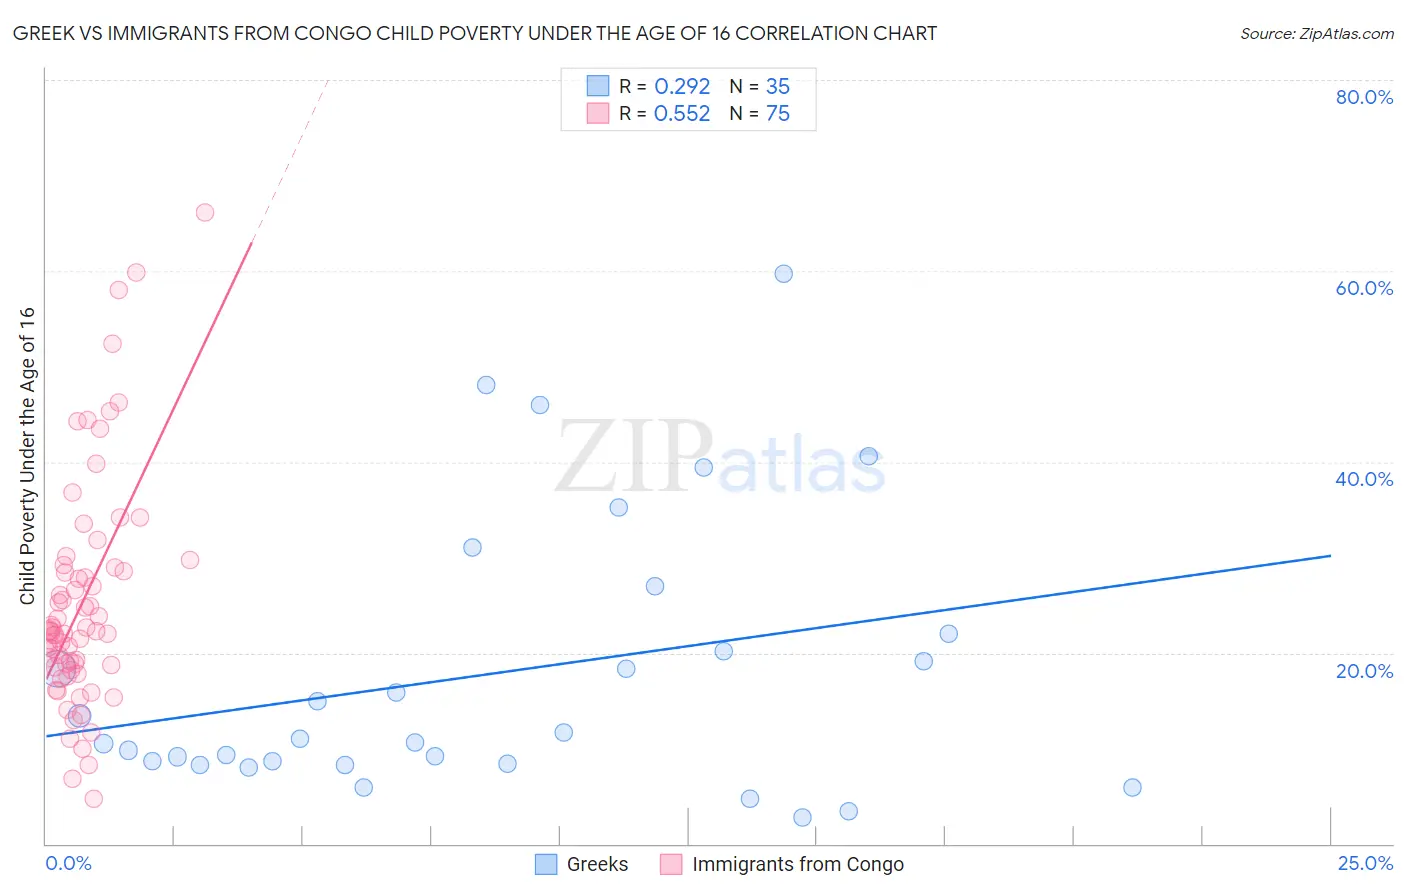 Greek vs Immigrants from Congo Child Poverty Under the Age of 16